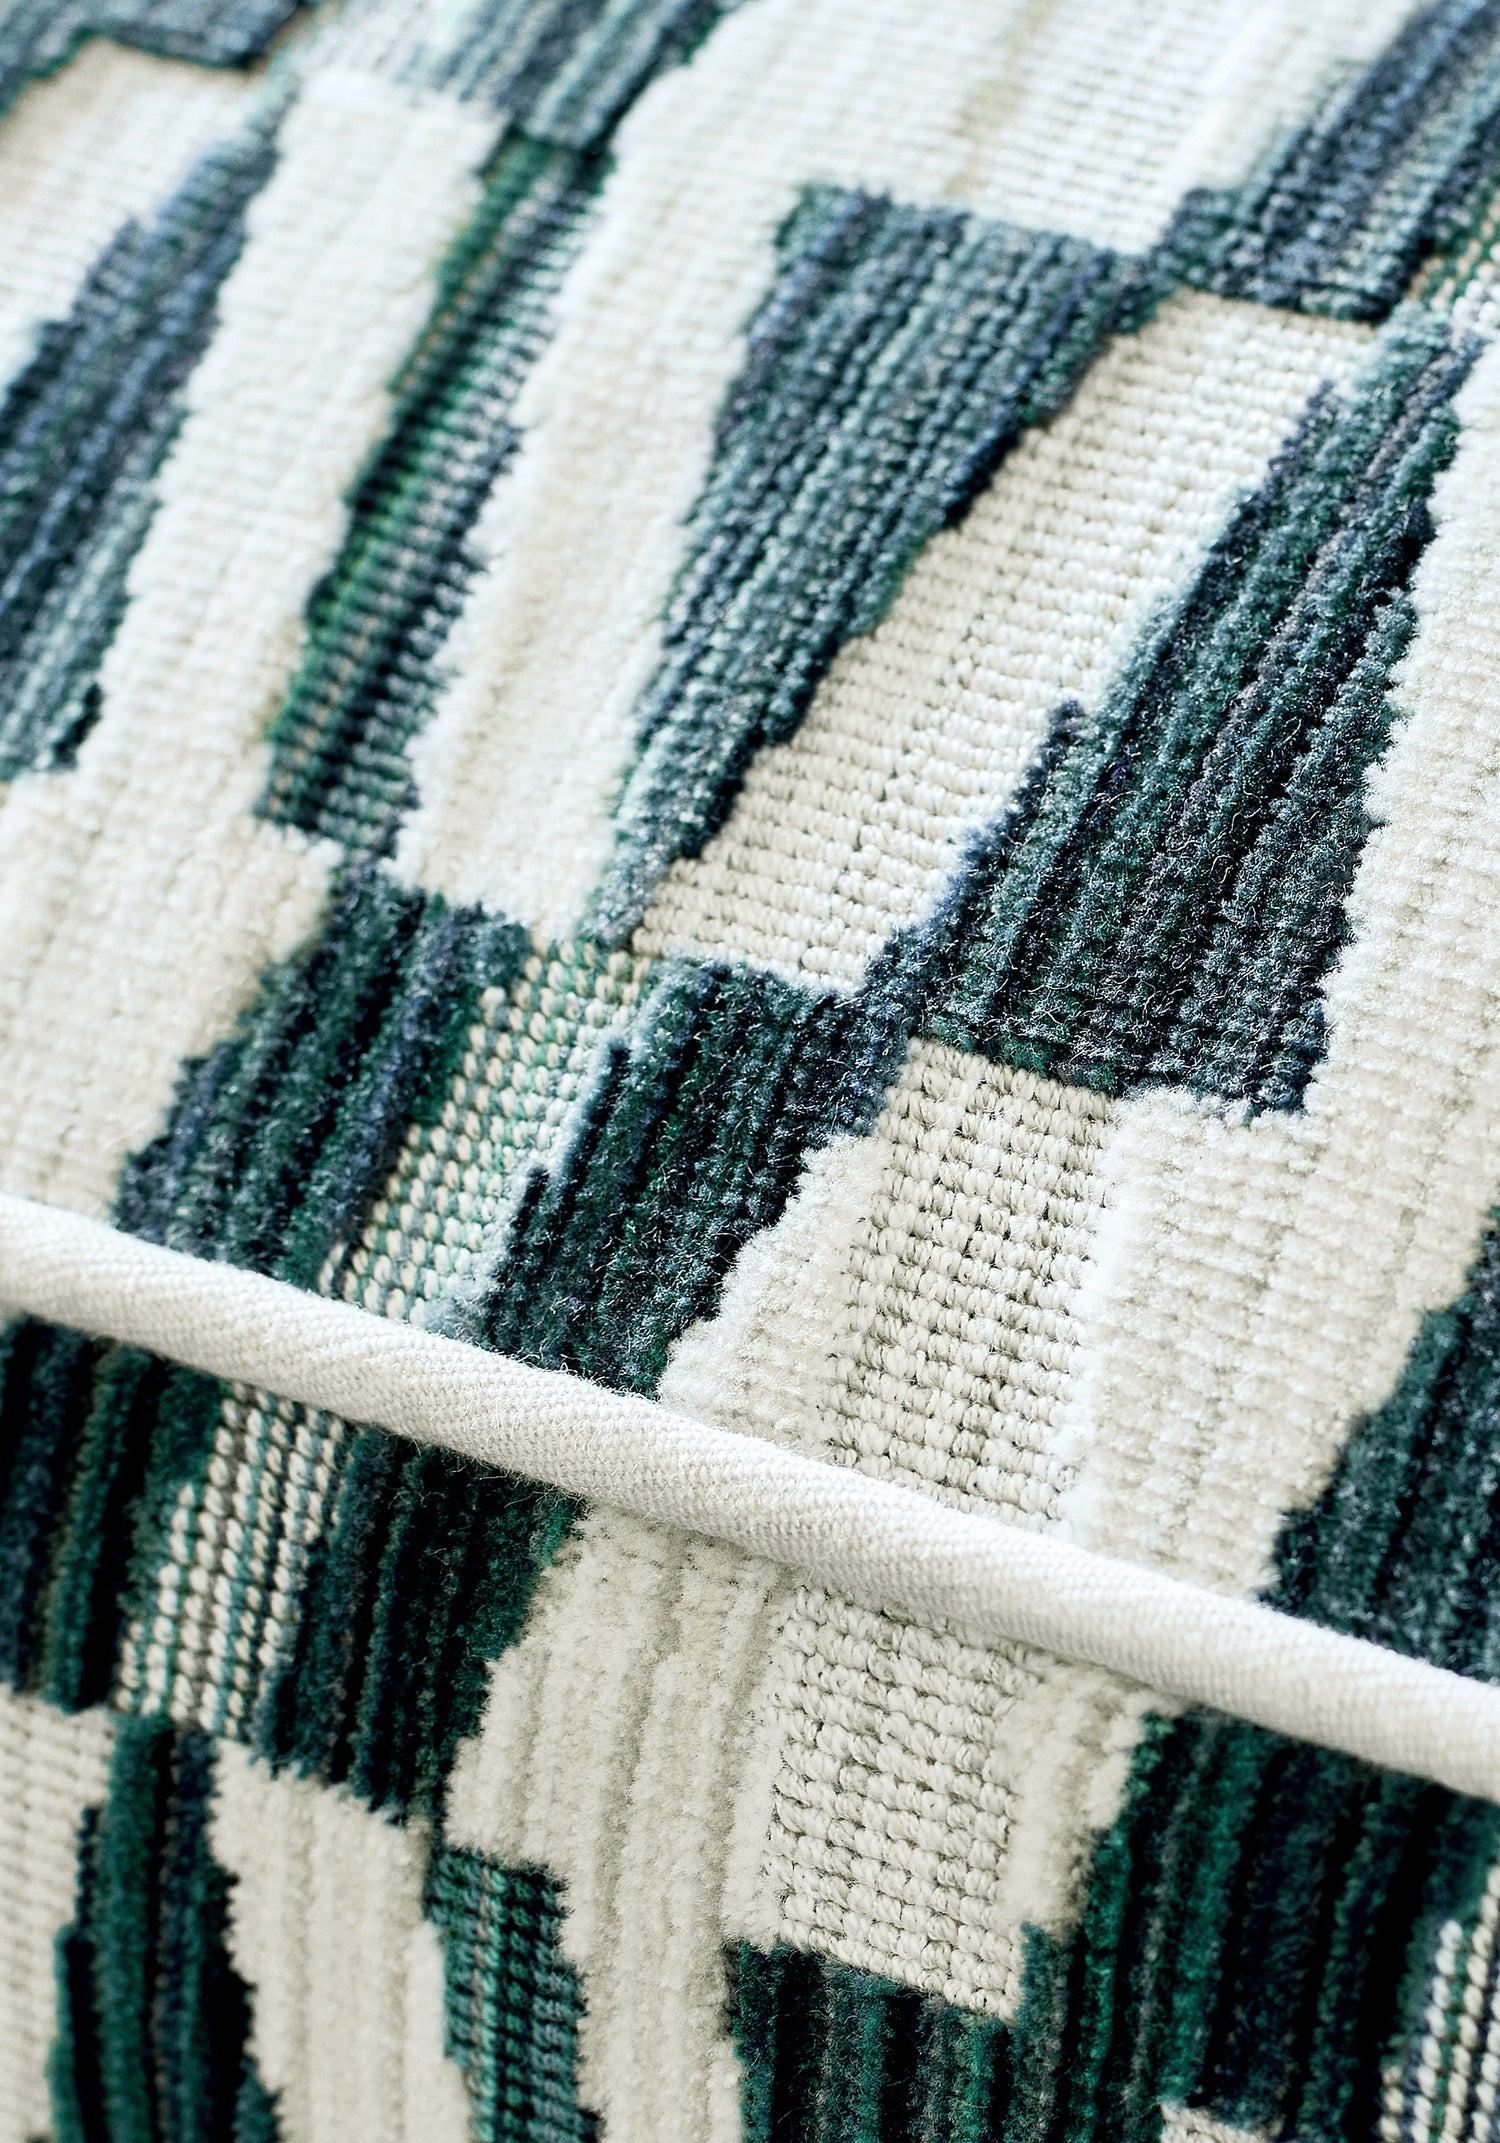 Detailed Bossa Nova Velvet woven fabric in peacock color - pattern number W72810 by Thibaut in the Woven Resource Vol 13 Fusion Velvets collection